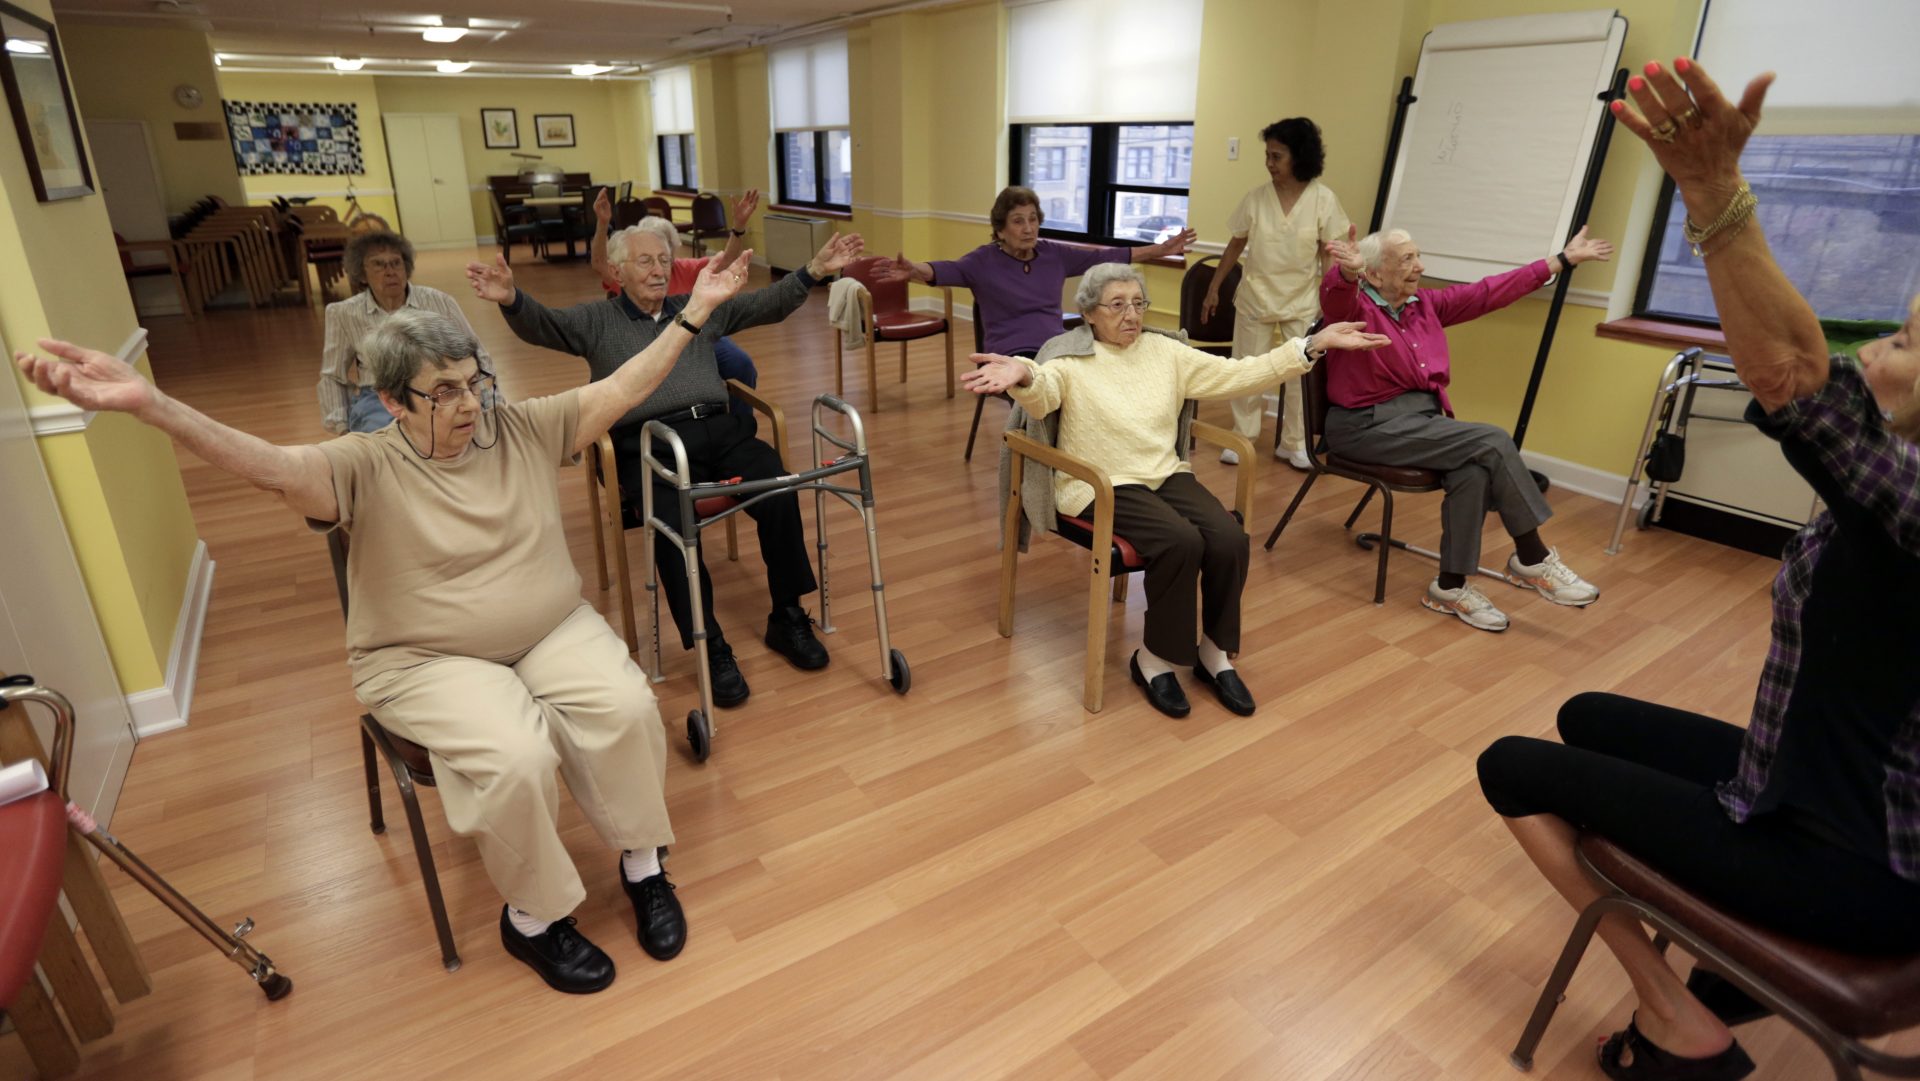 In this Oct. 4, 2013 photo, Holocaust survivor, Margie Oppenheimer, 89, left, participates in a yoga class with others at the retirement community called Selfhelp Home, on the North Side of Chicago. One day at the Stutthof concentration camp in Poland, Nazis marched Oppenheimer and others naked into an open field for inspection. Those strong enough to work were directed to the right. Oppenheimer, who was emaciated, was ordered to the left with hundreds of older women. She was placed into new barracks and had the Roman numeral II scrawled on her left forearm. Death seemed inevitable. "I'm thinking this is the last time I will see the sun," she recalls.